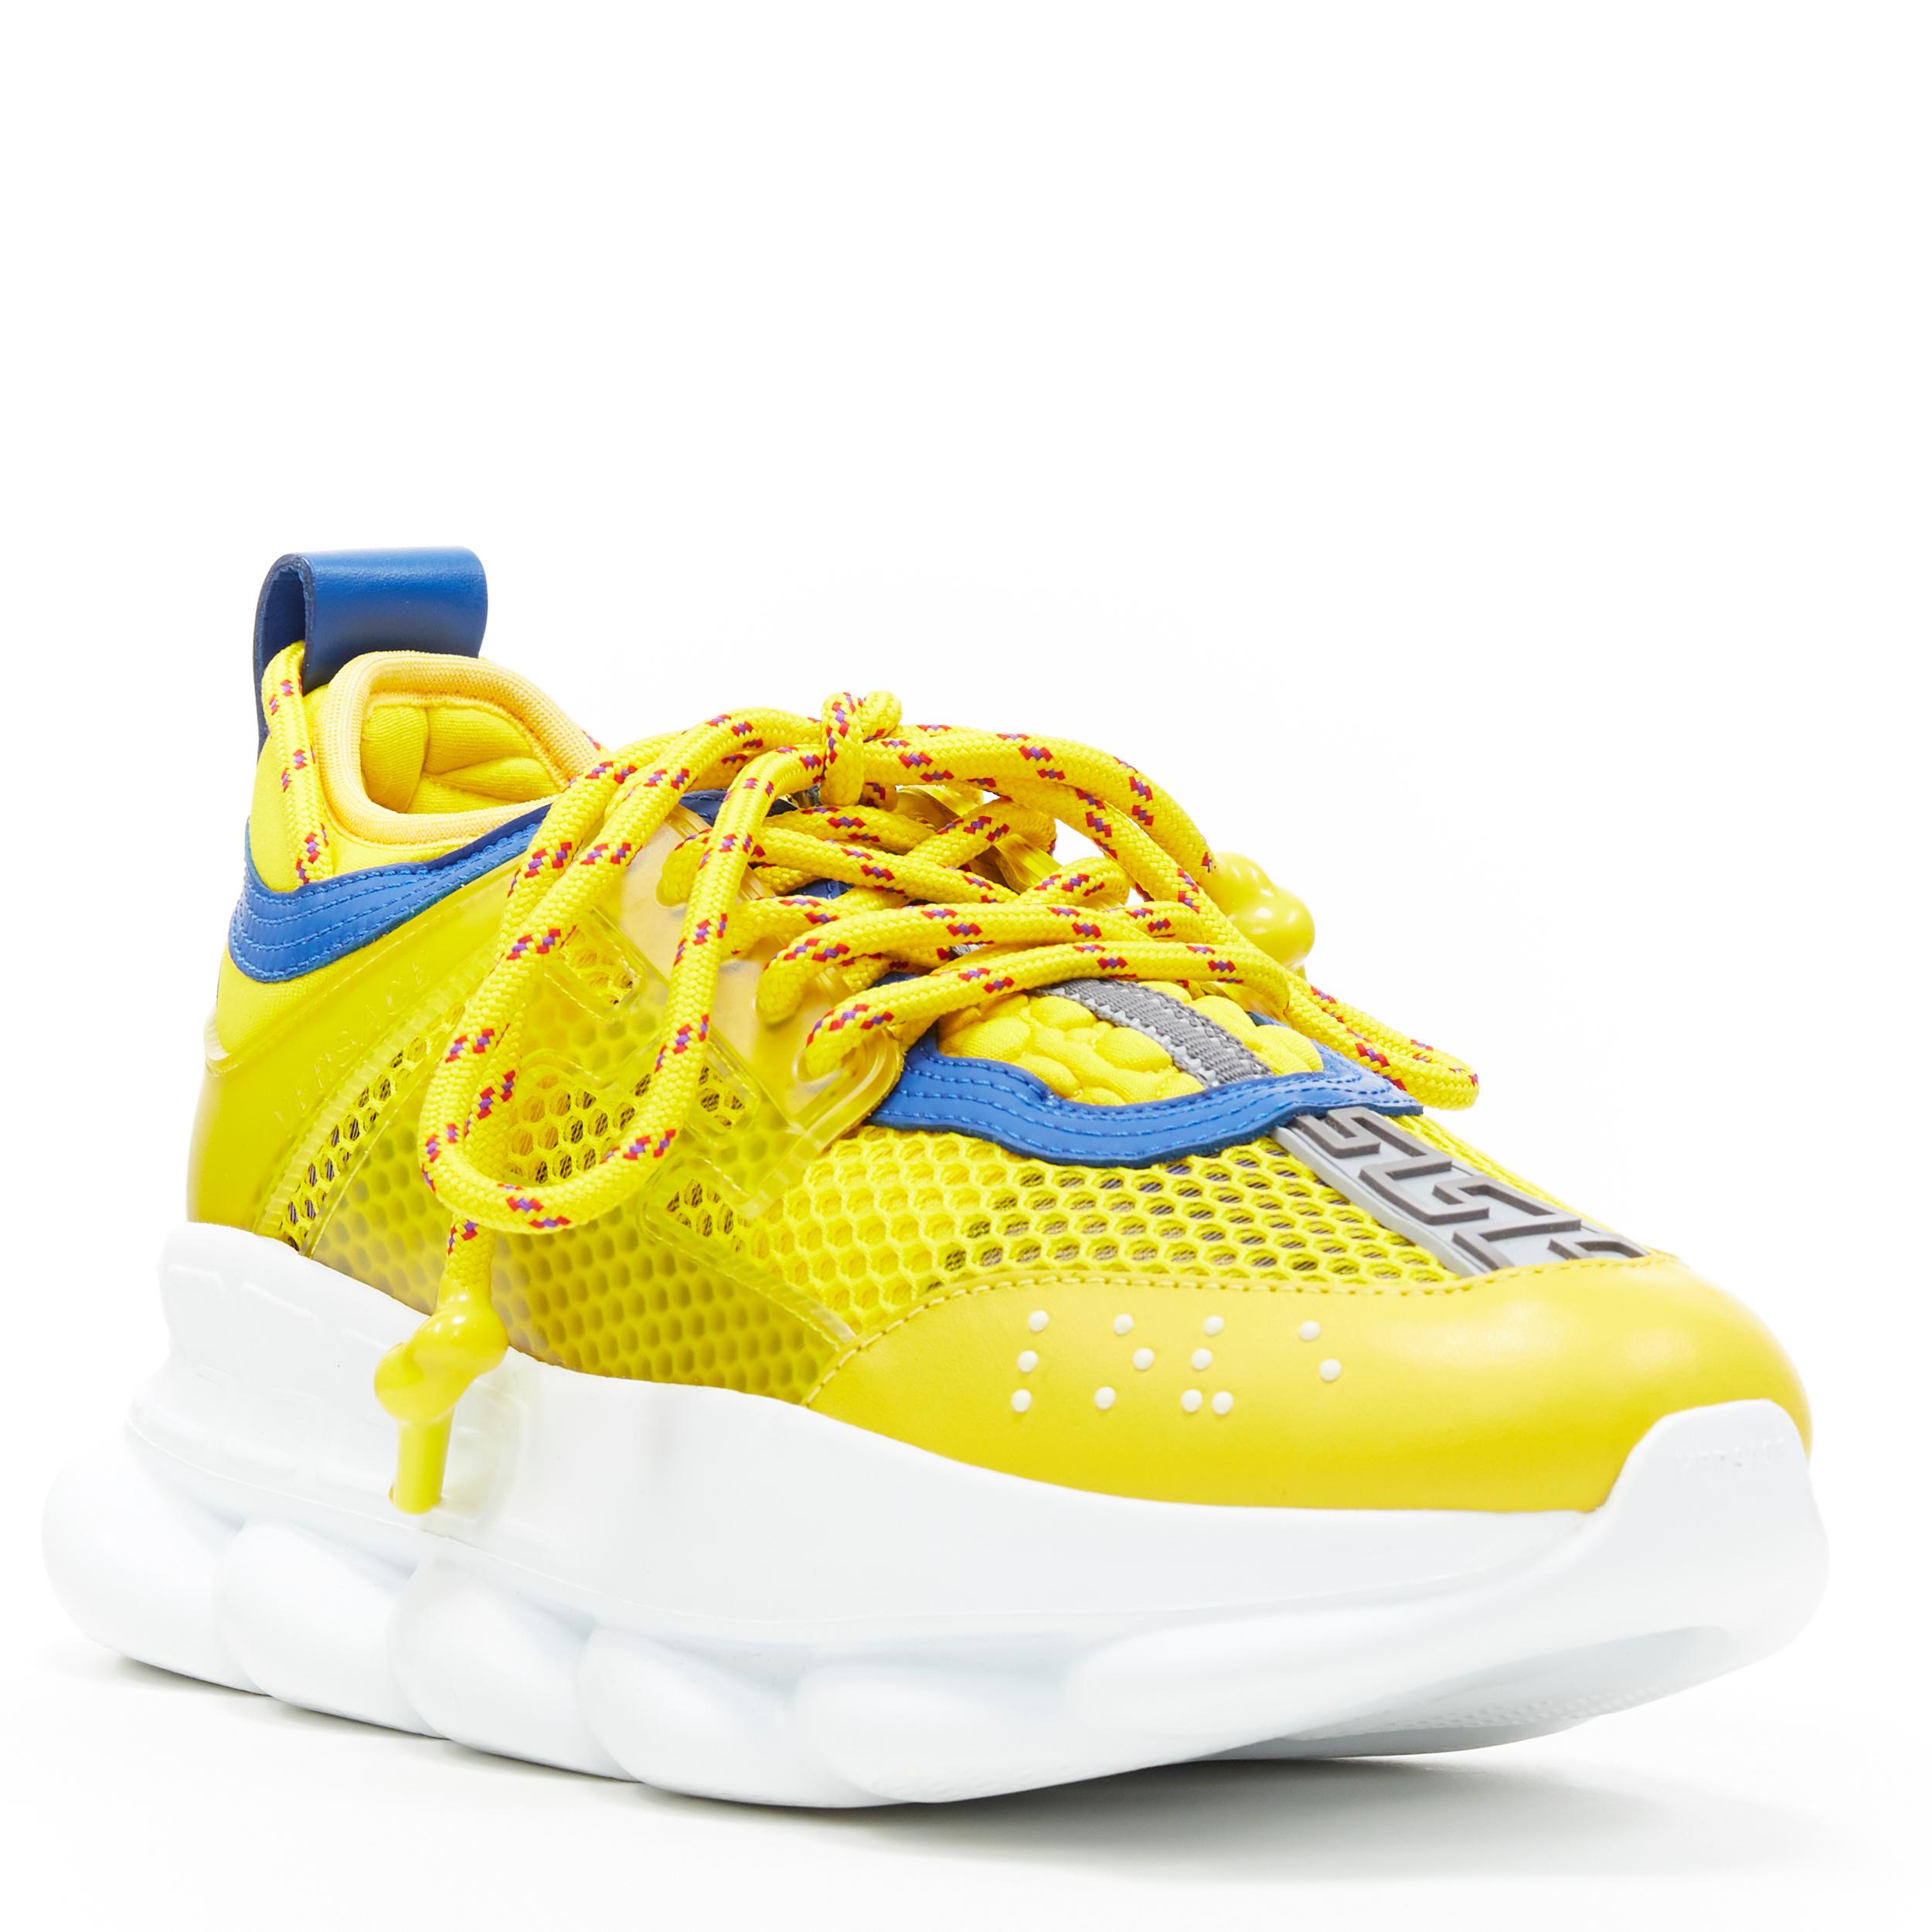 new VERSACE Chain Reaction yellow blue low top chunky sole dad sneaker EU35.5 
Reference: TGAS/B00069 
Brand: Versace 
Designer: Salehe Bembur 
Model: Versace Chain Reaction 
Material: Fabric 
Color: Yellow 
Pattern: Solid 
Closure: Lace up 
Extra